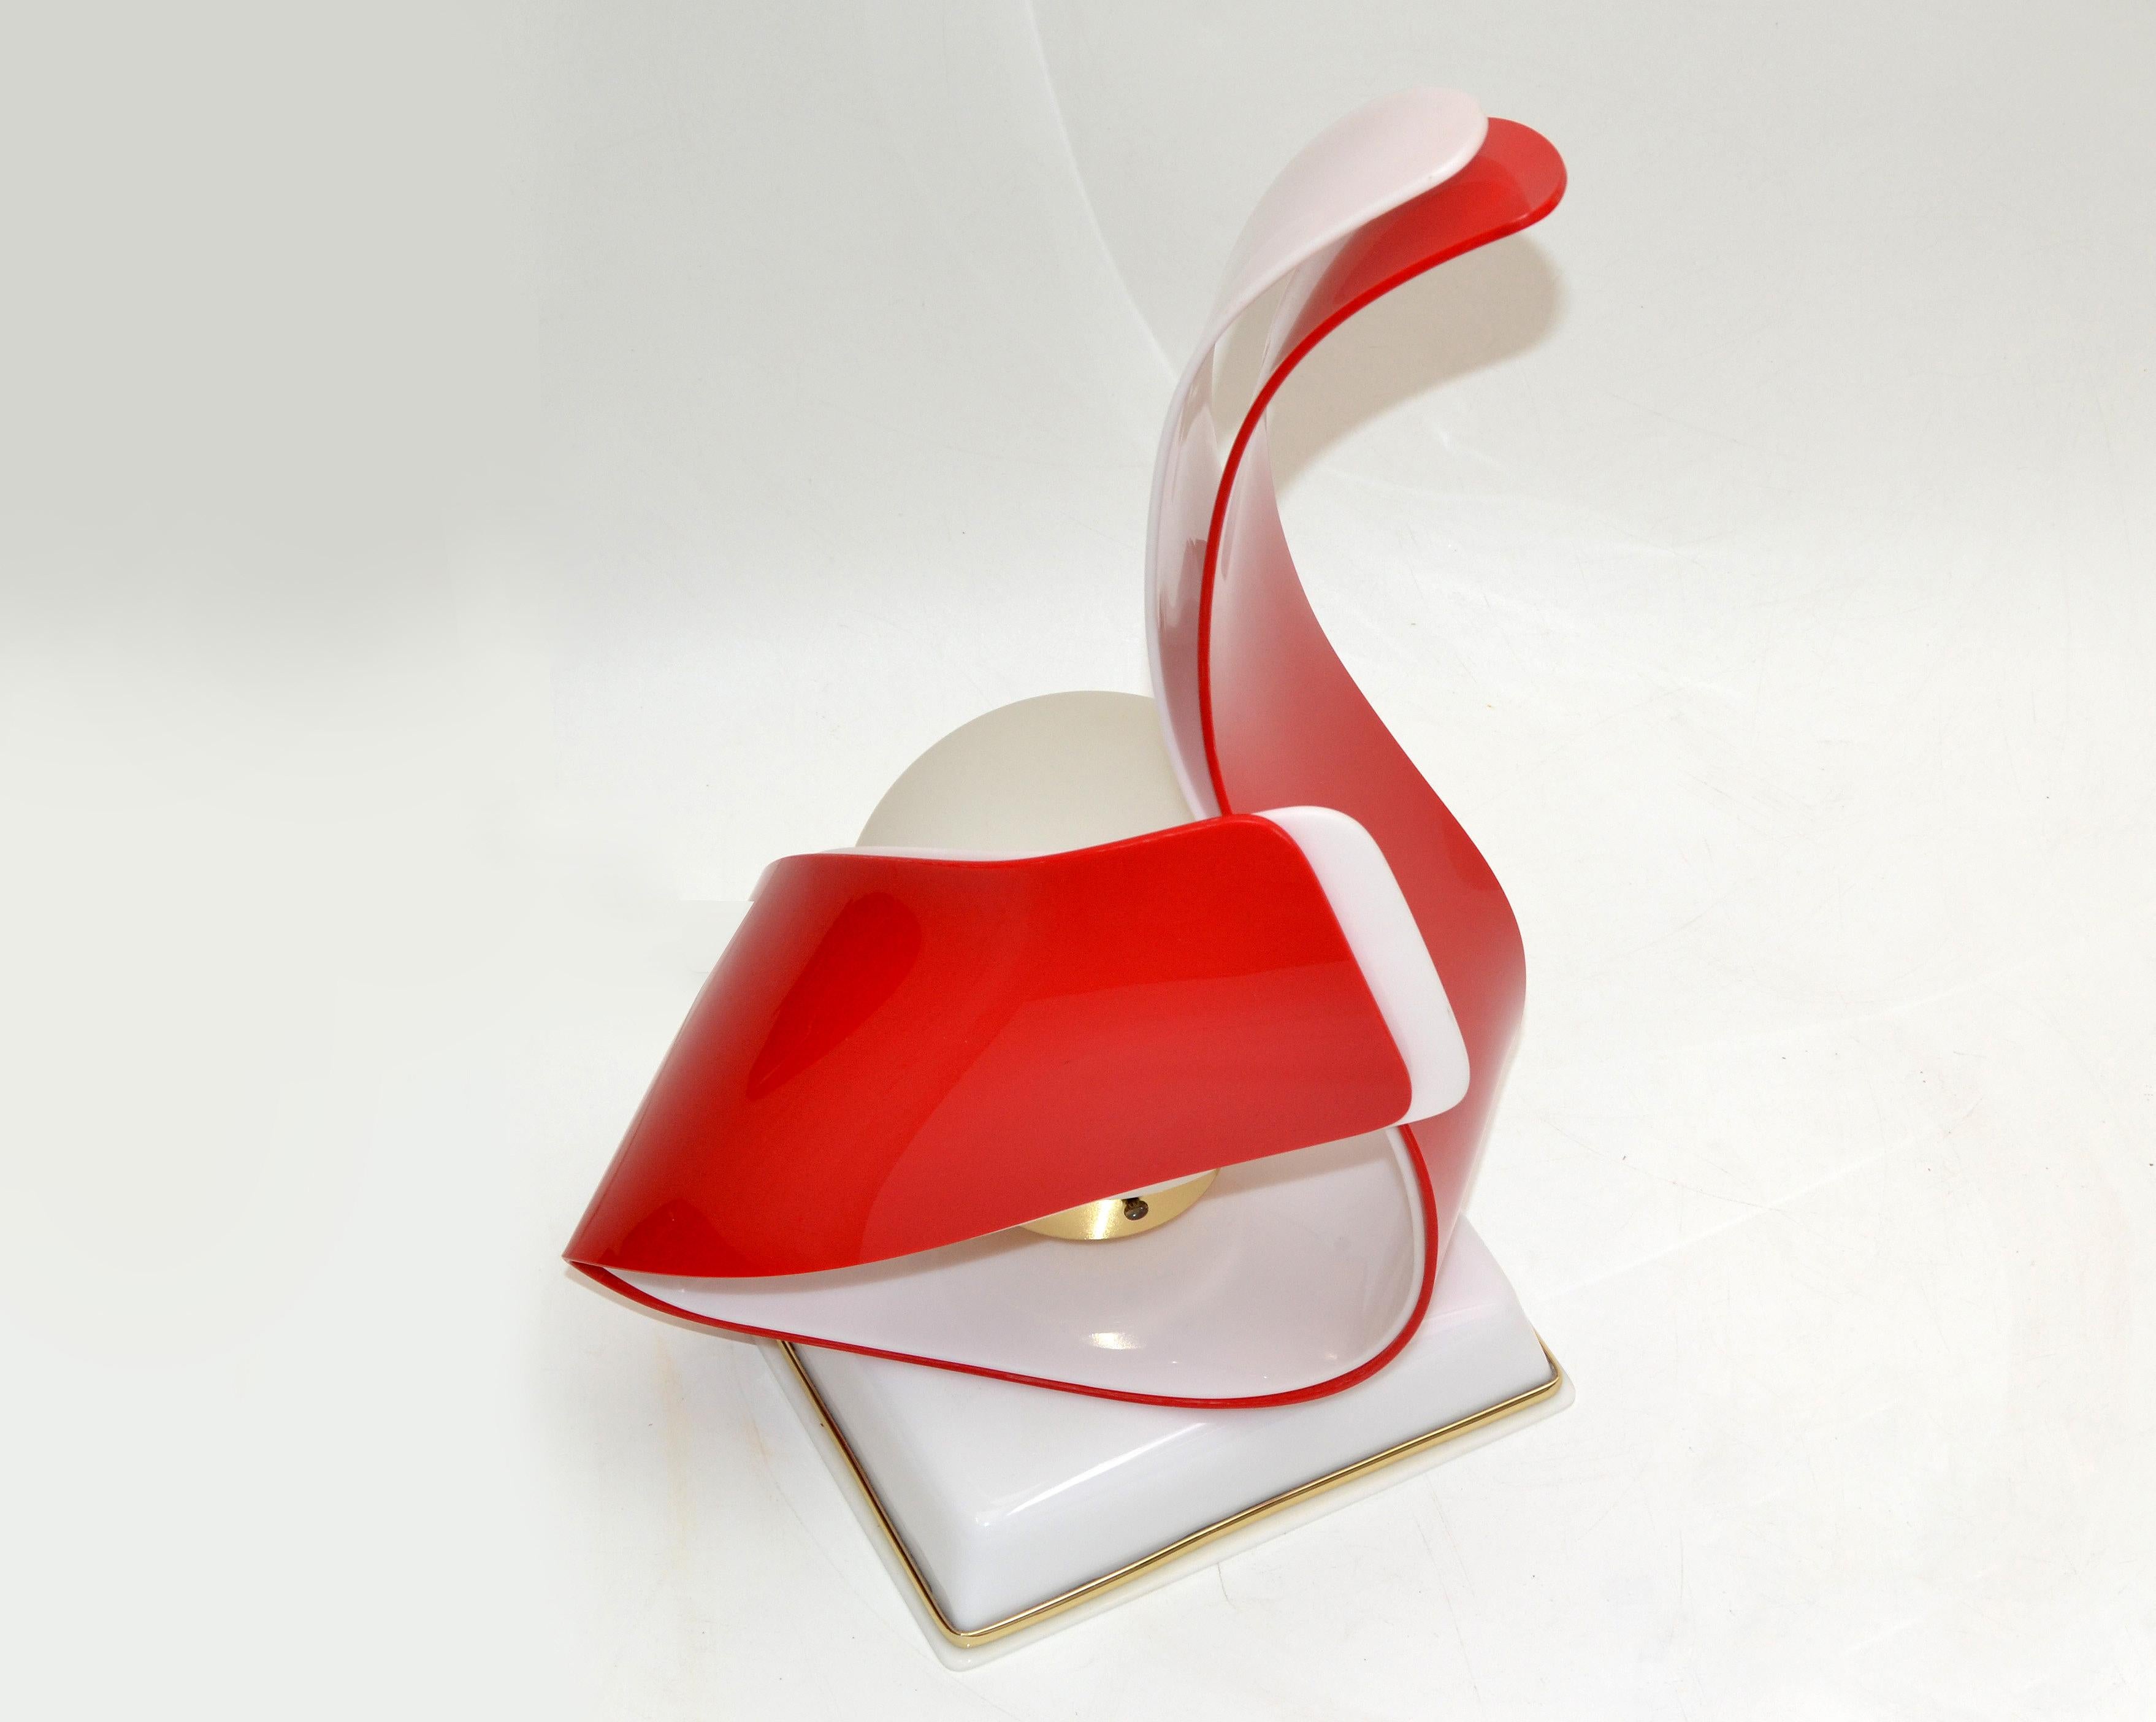 Hand-Crafted Red & White Acrylic Sculptural Table Lamp by Acrylic Design White Opaline Glass For Sale